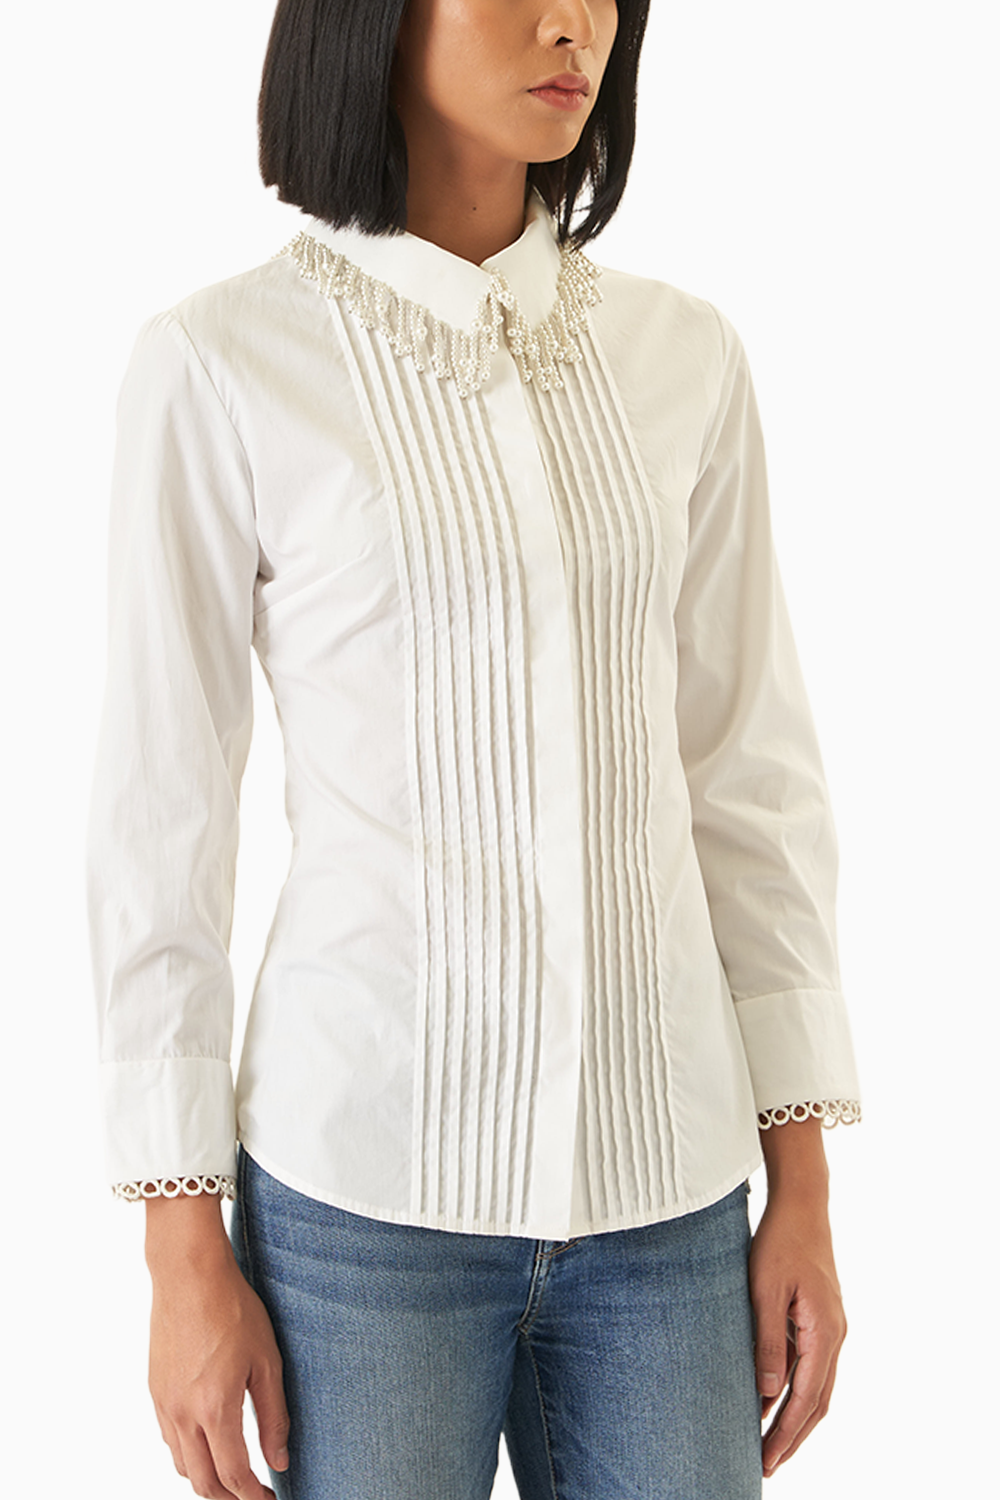 White Pintucked Shirt with Pearl Embellished Collar